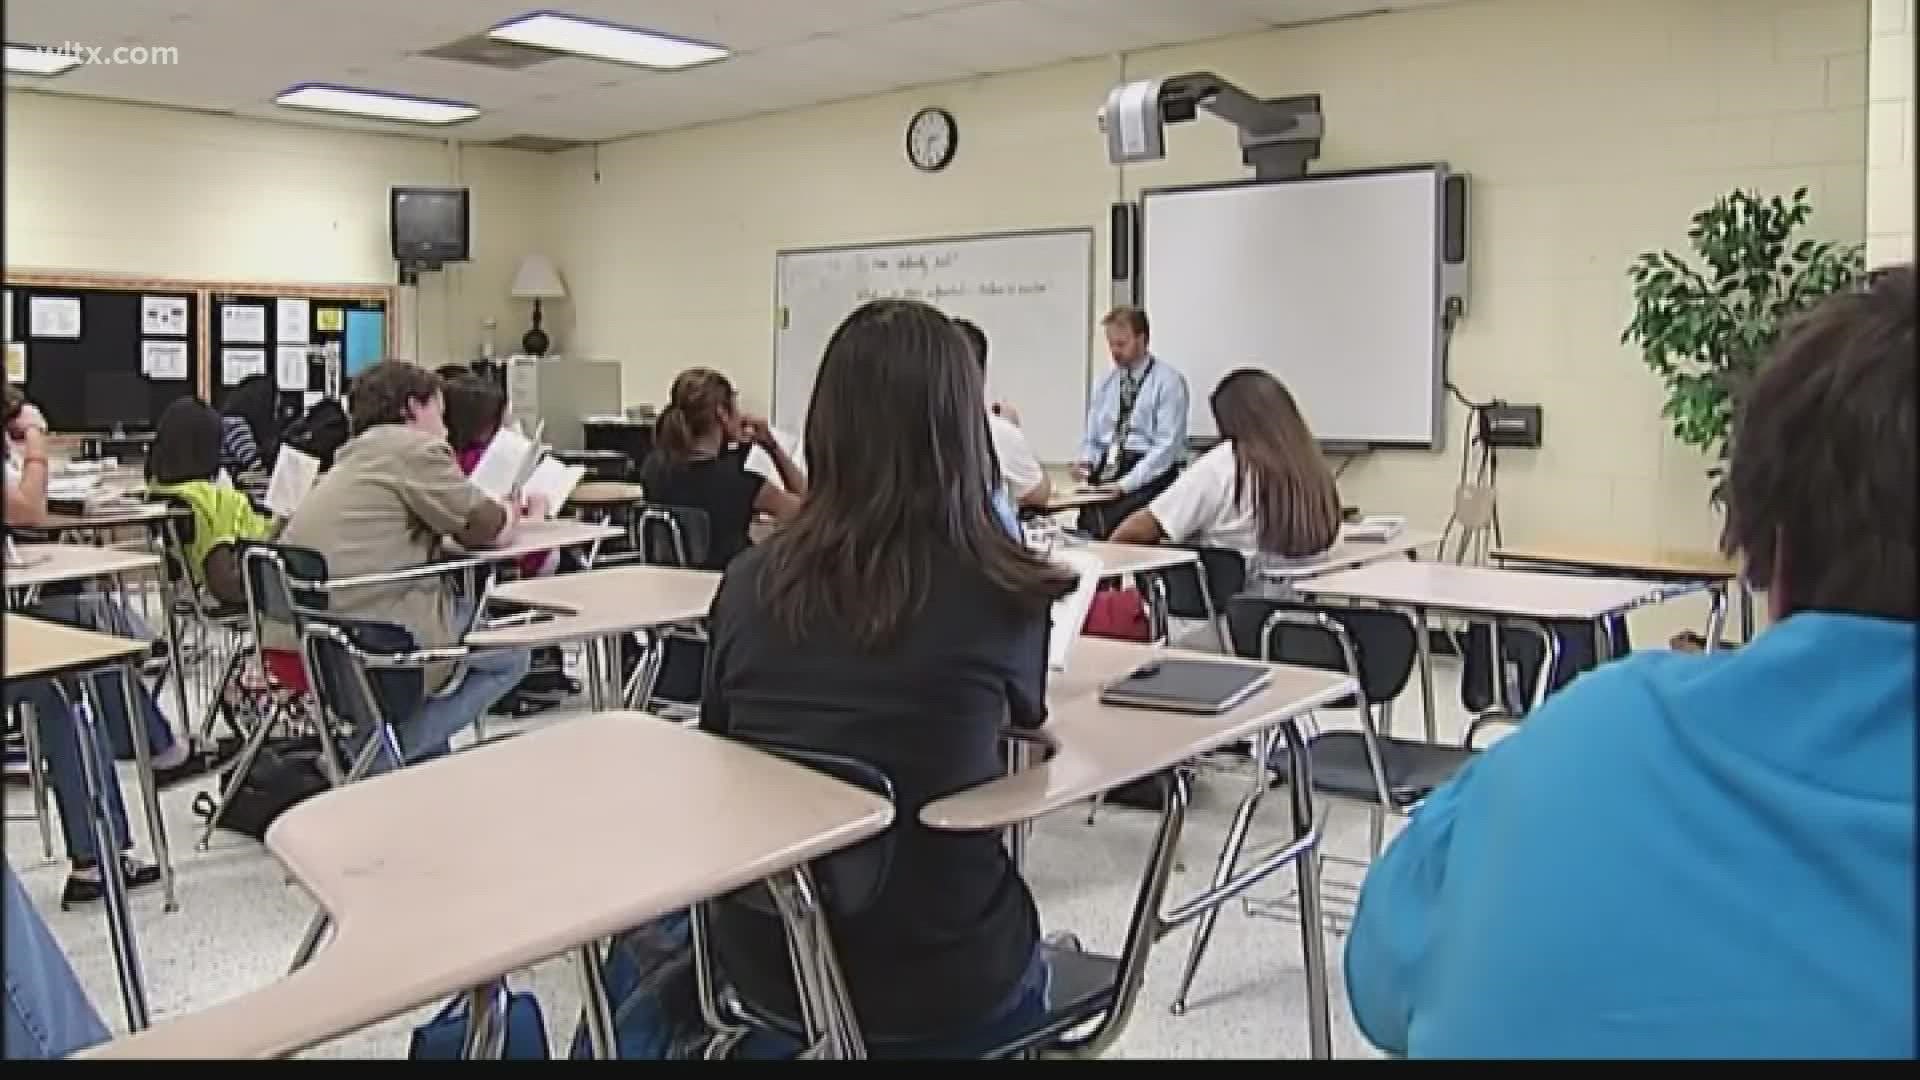 Test scores give Department of Education hope for learning loss